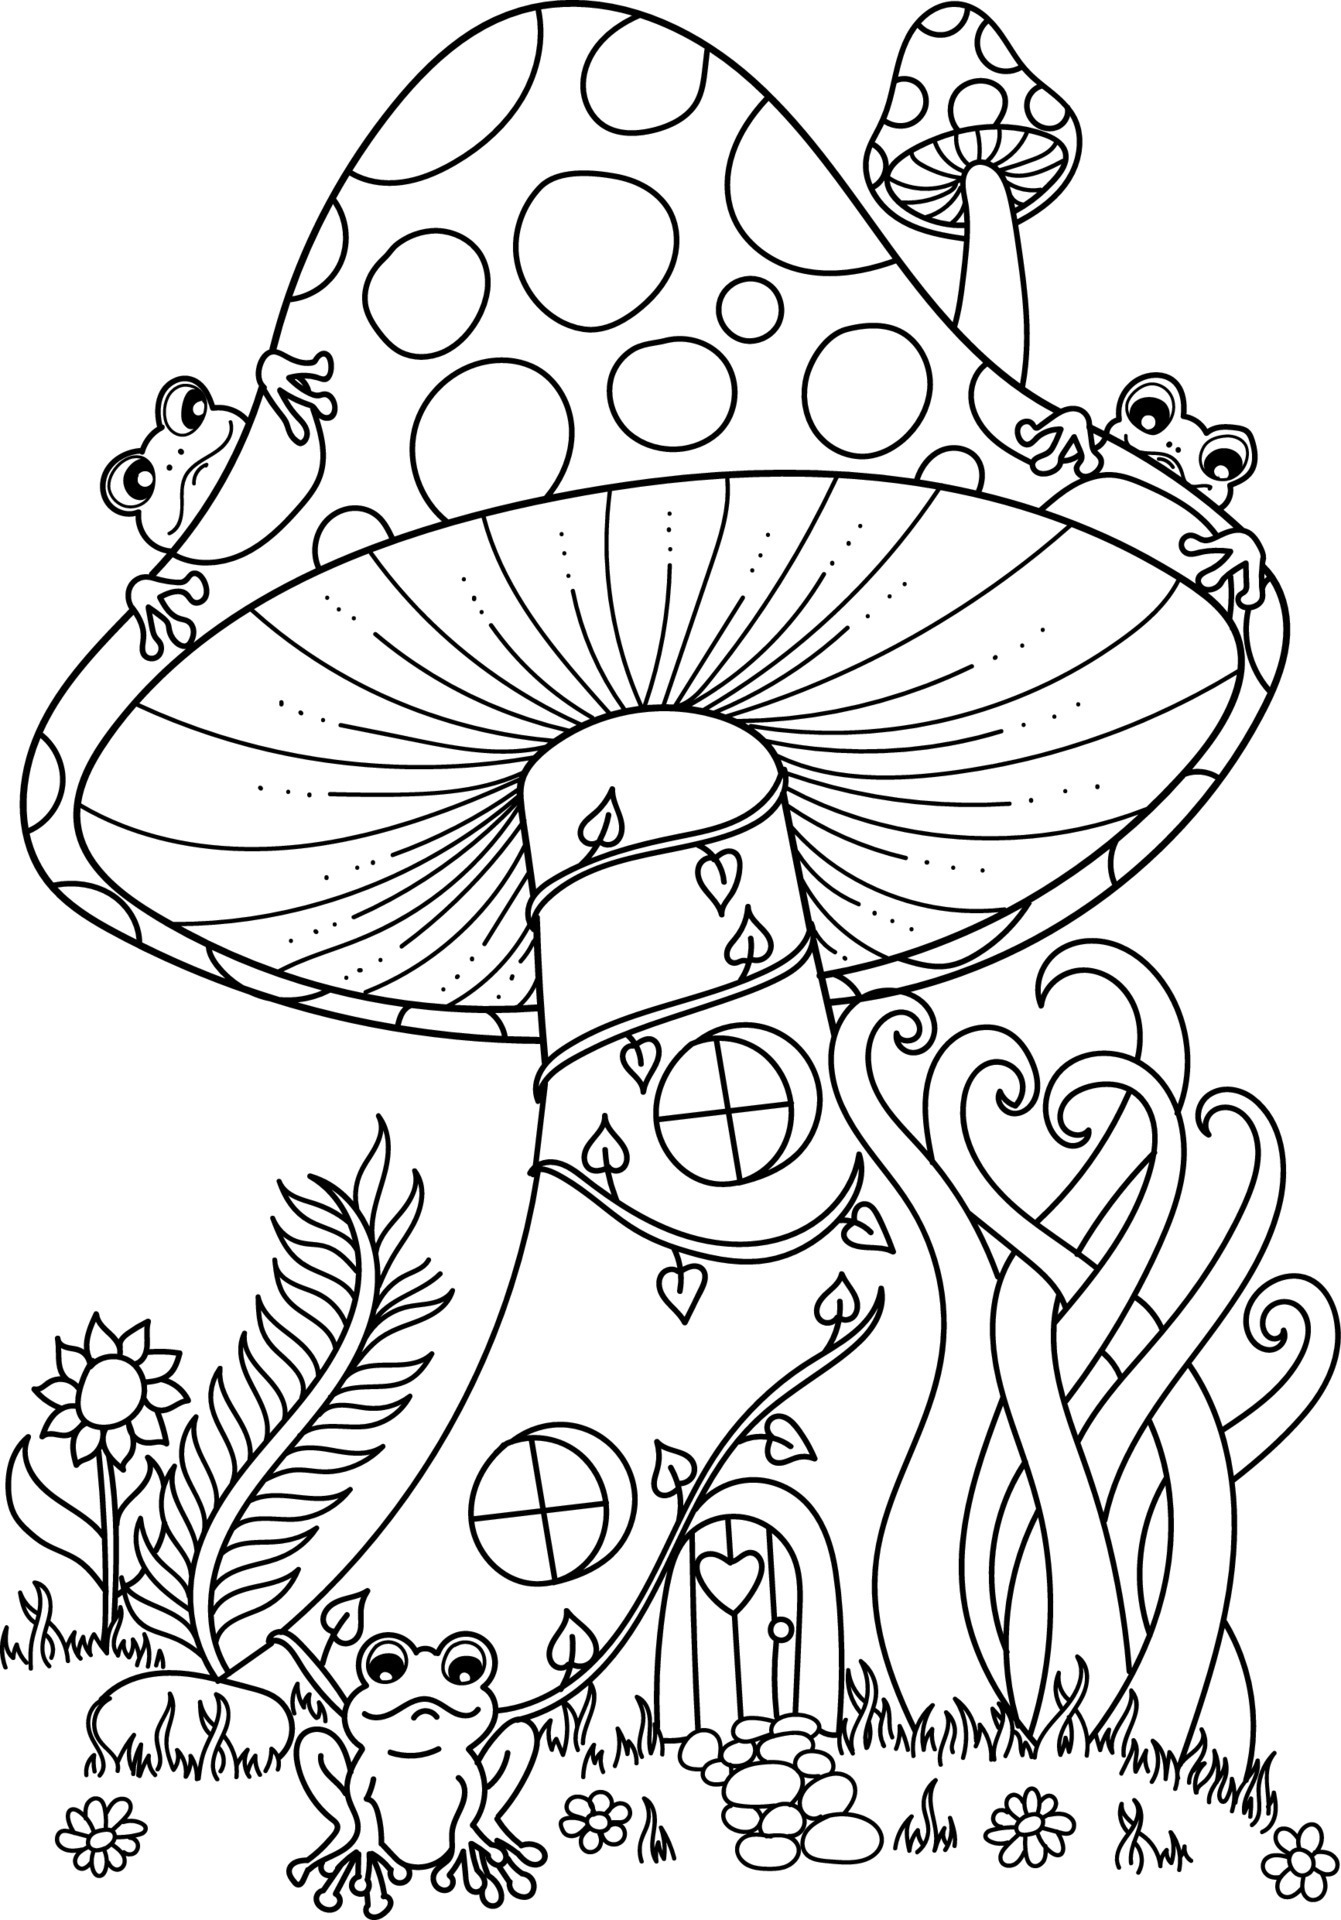 Mushroom Coloring Page Vector Art, Icons, and Graphics for Free Download